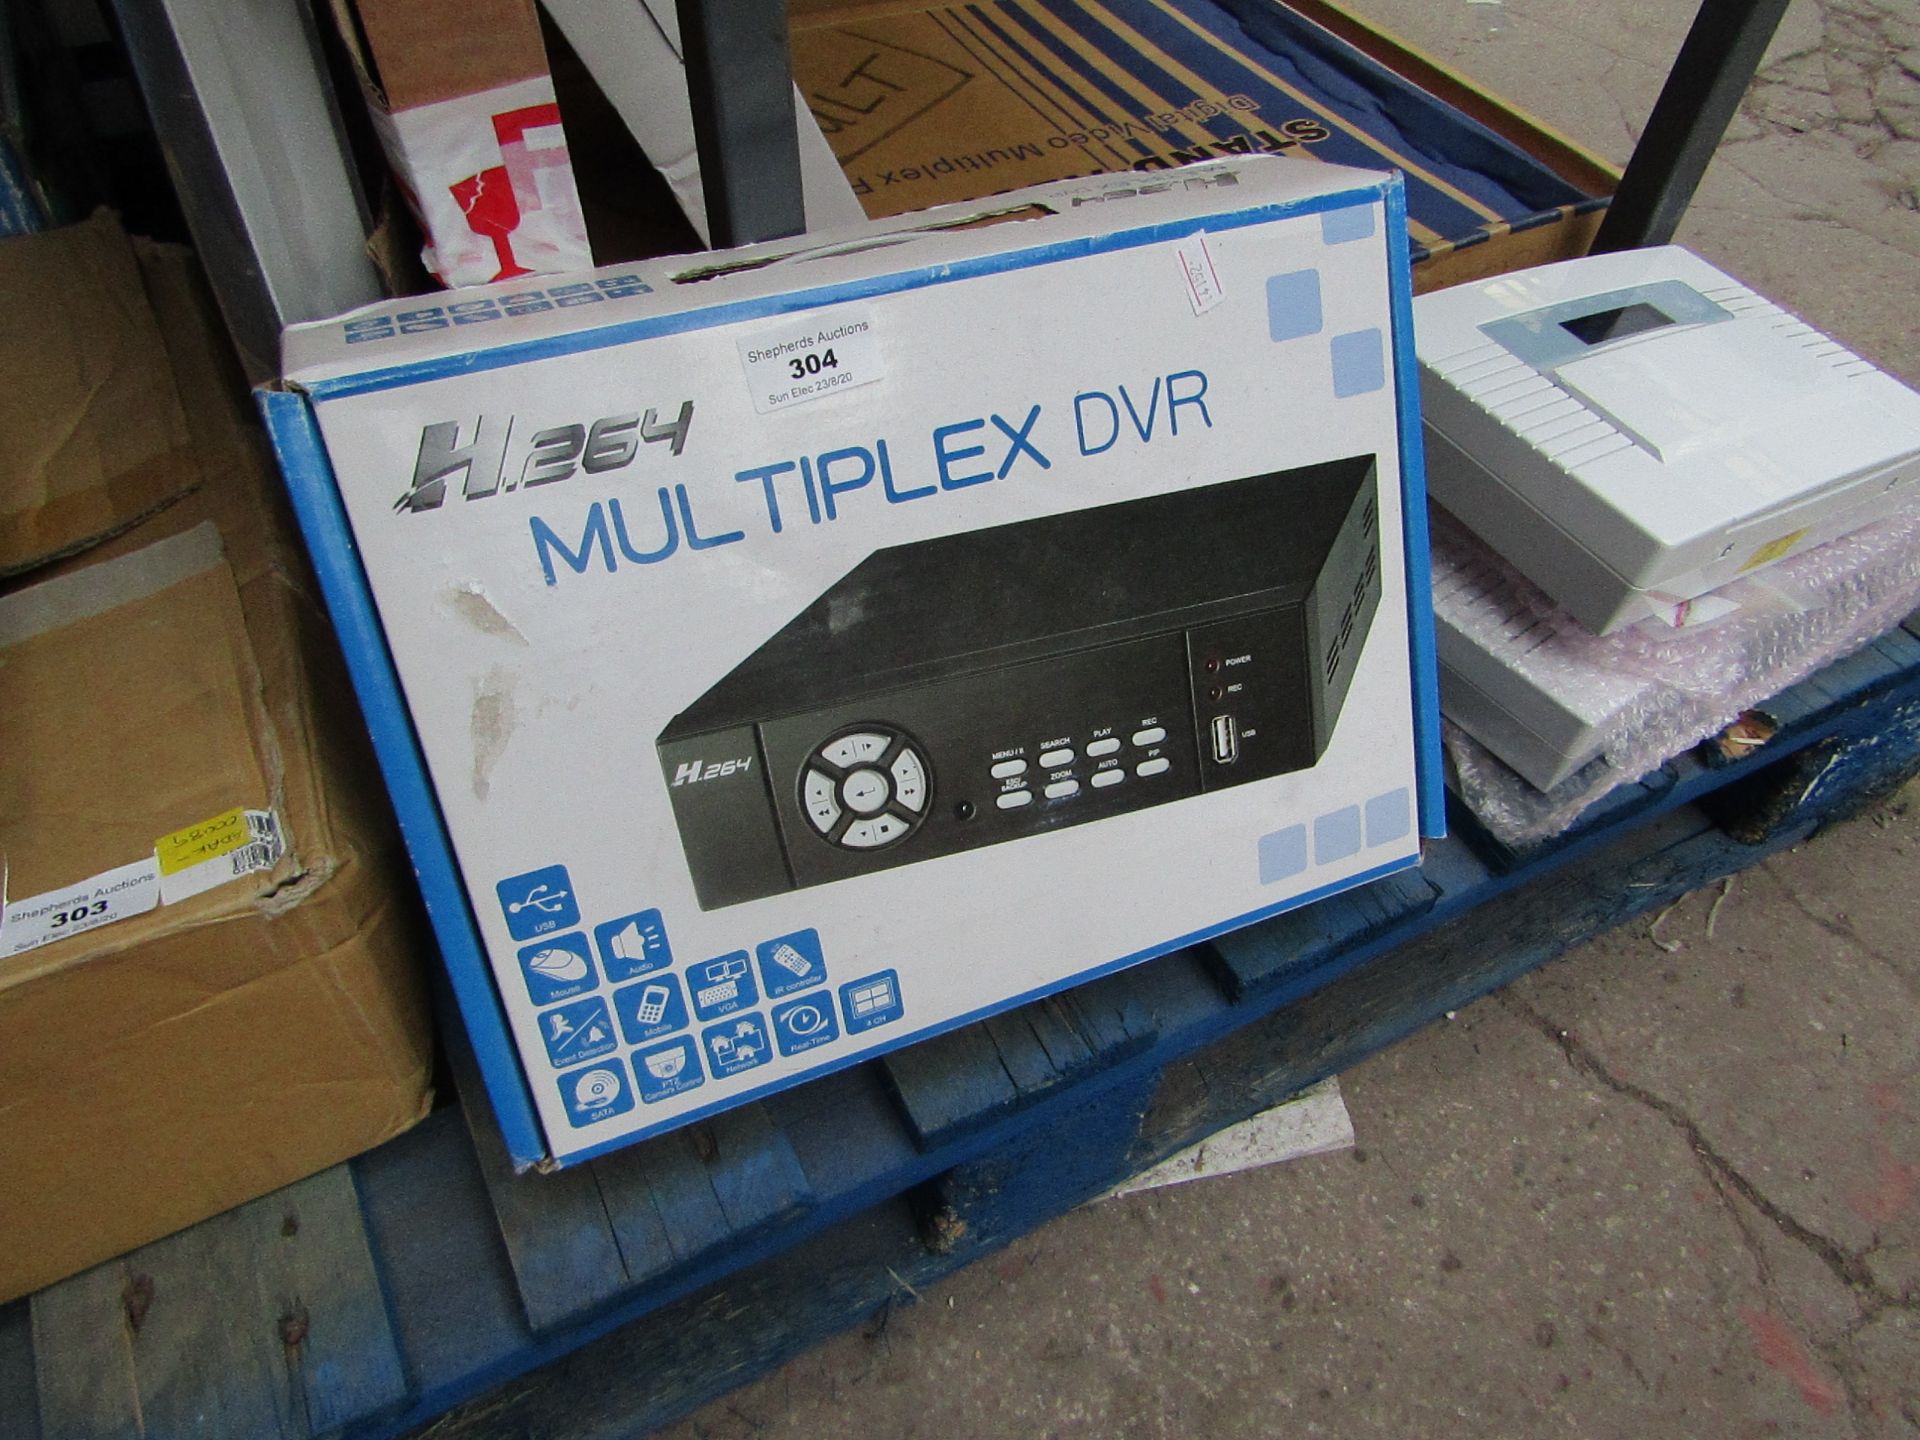 MultiPlex DVR - H.264 - Untested & Boxed.